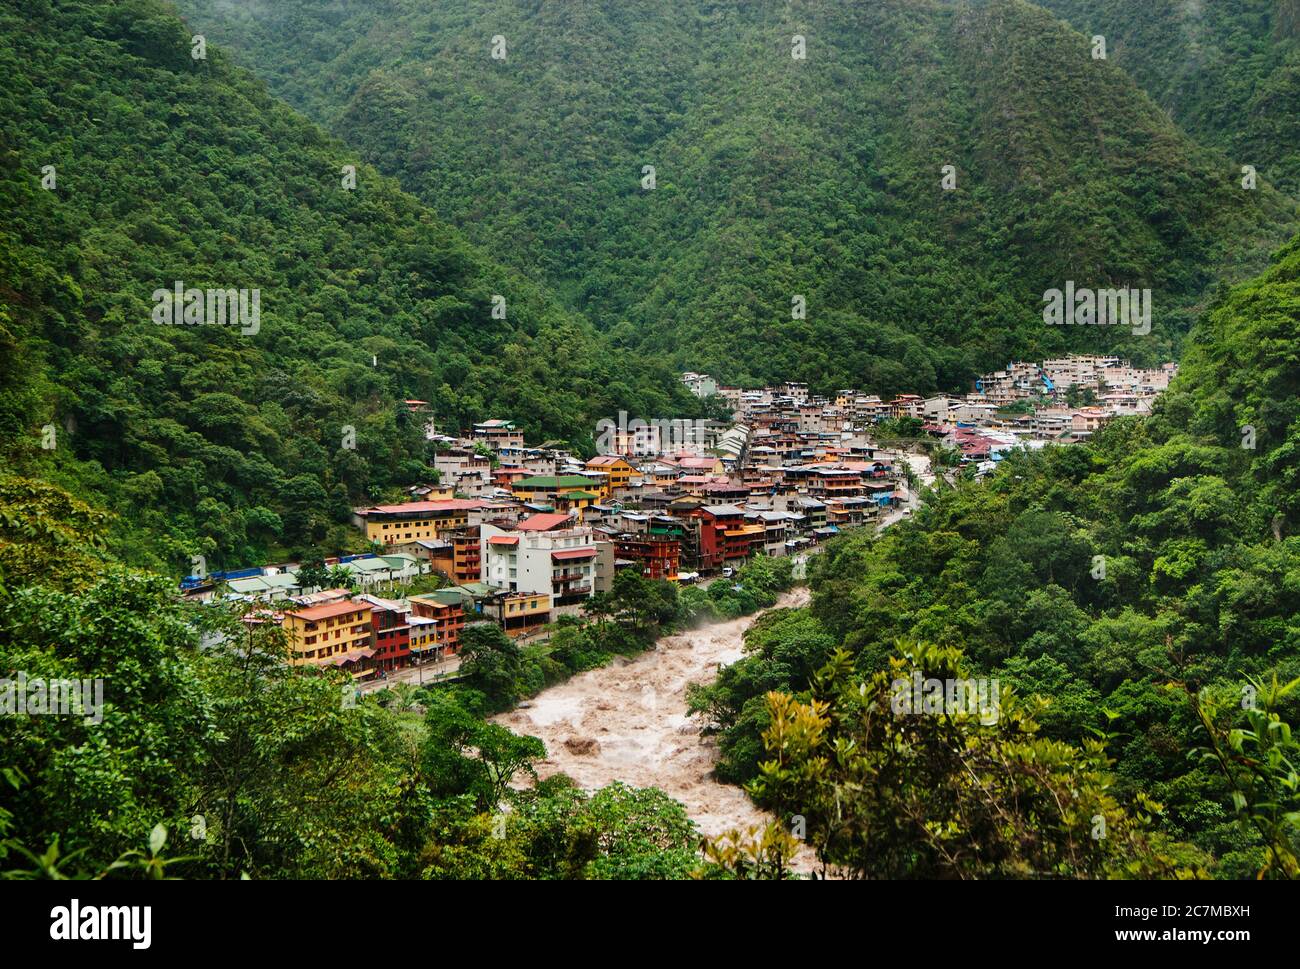 The green Andes mountains surrounding the town of Aguas Calientes, Cusco, Peru, South America Stock Photo